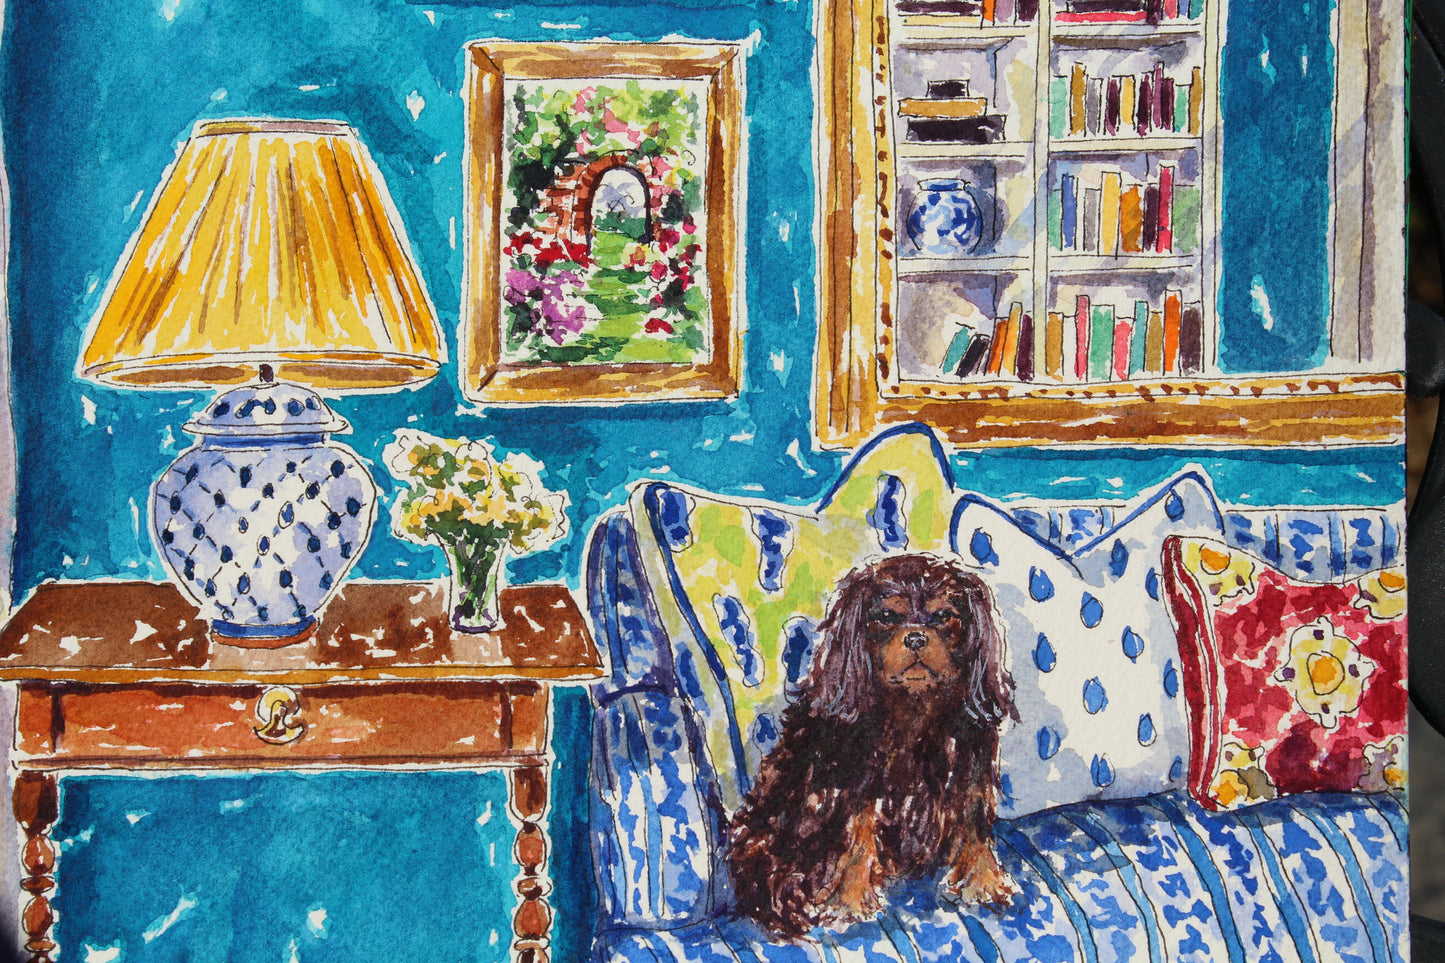 Mirror Mirror On The Wall, An Original 14" x 10" Watercolor And Ink Painting Of A Room Scene With A Teal Wall And King Charles Cavalier Spaniel